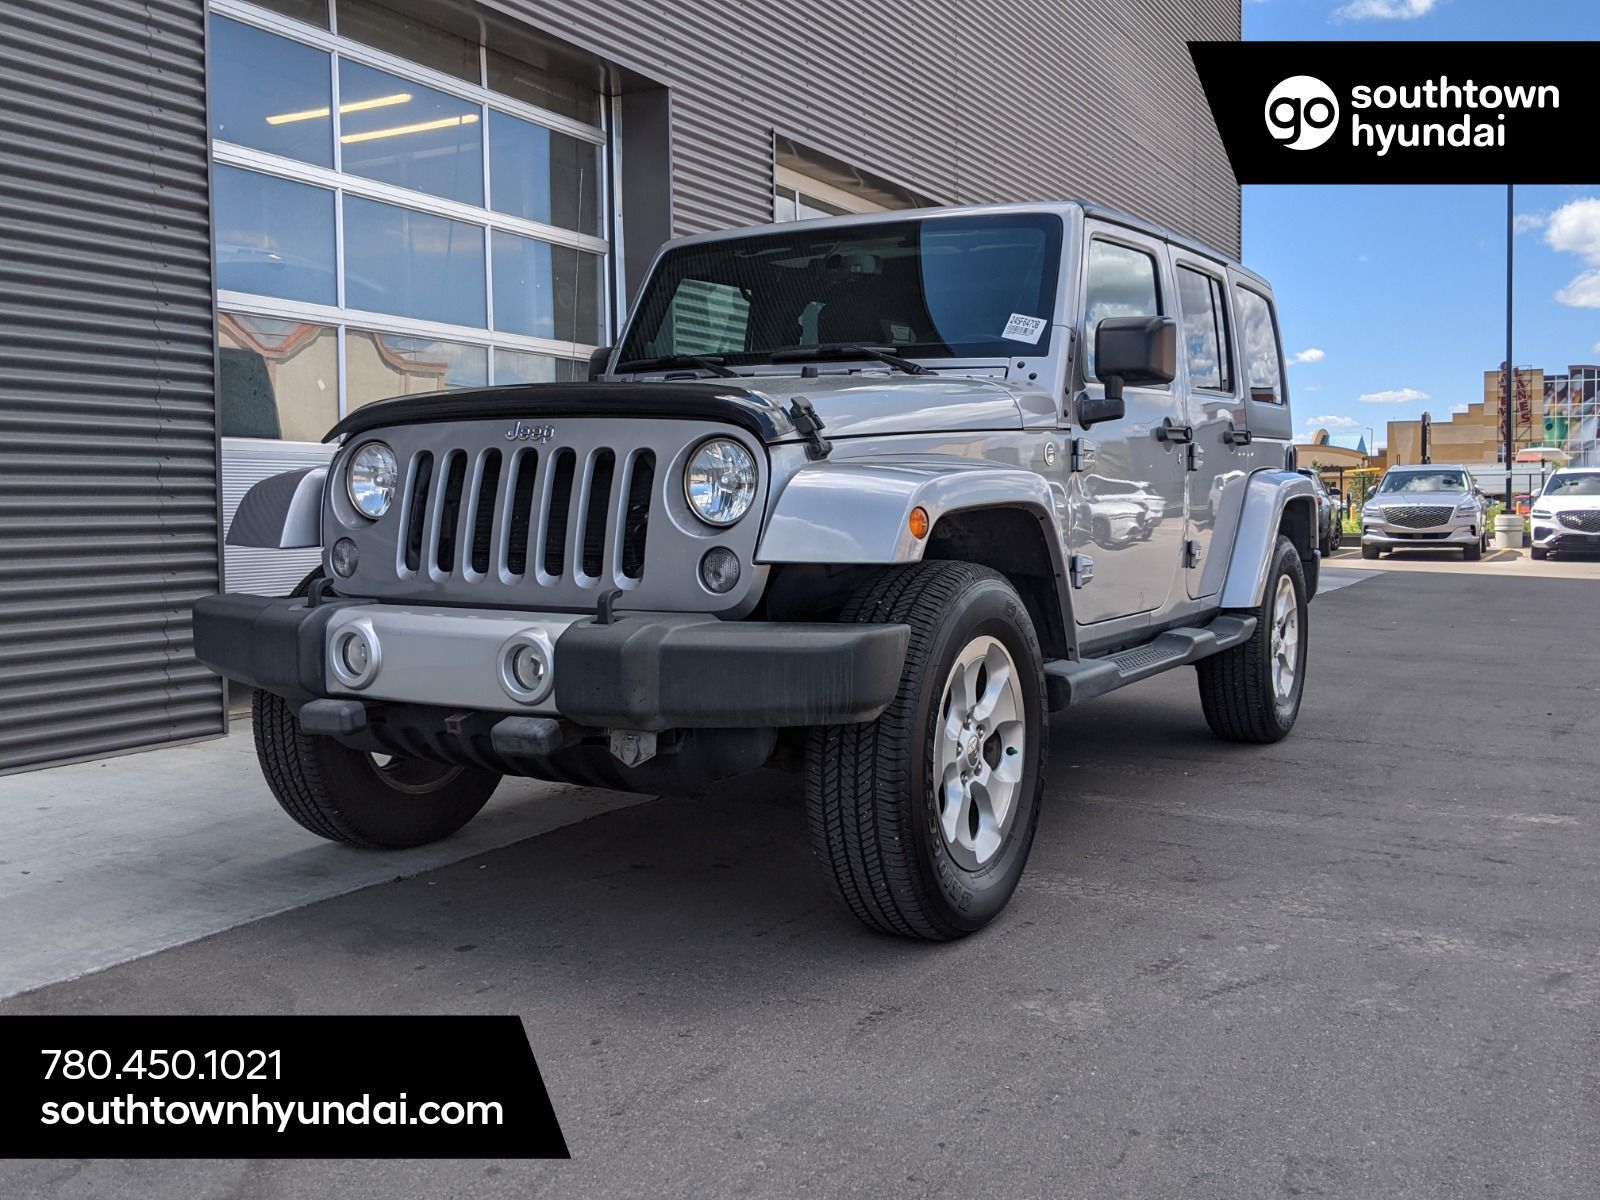 2014 Jeep WRANGLER UNLIMITED Sahara 4x4 - No Accidents! Low Kms!